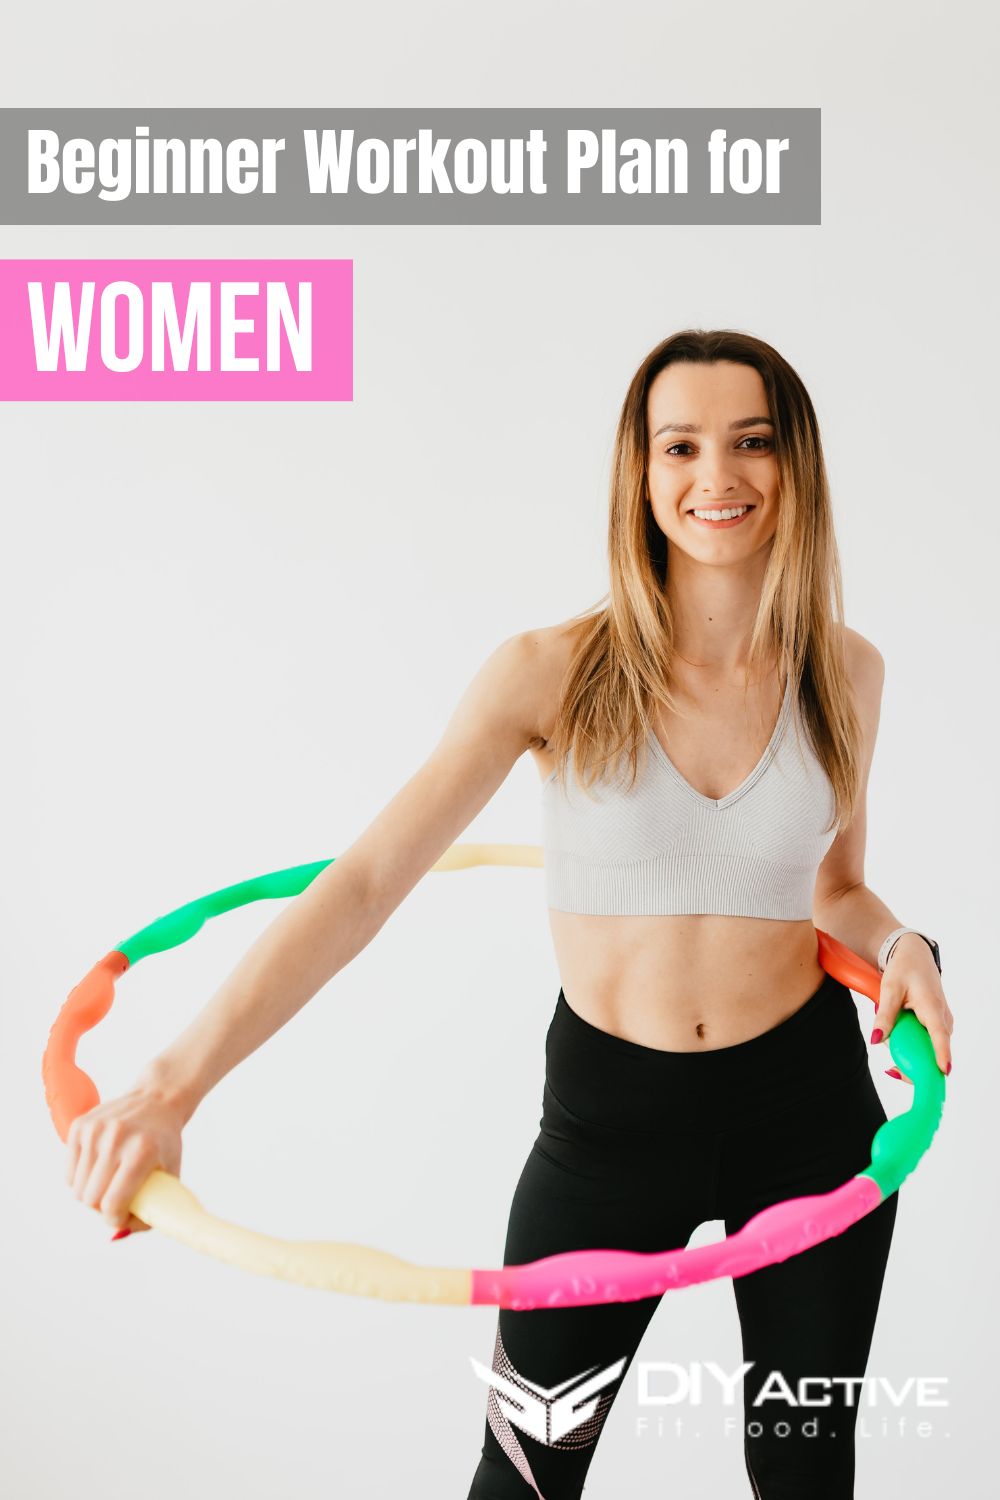 Back to the Basics: A Beginner's Workout Plan for Women